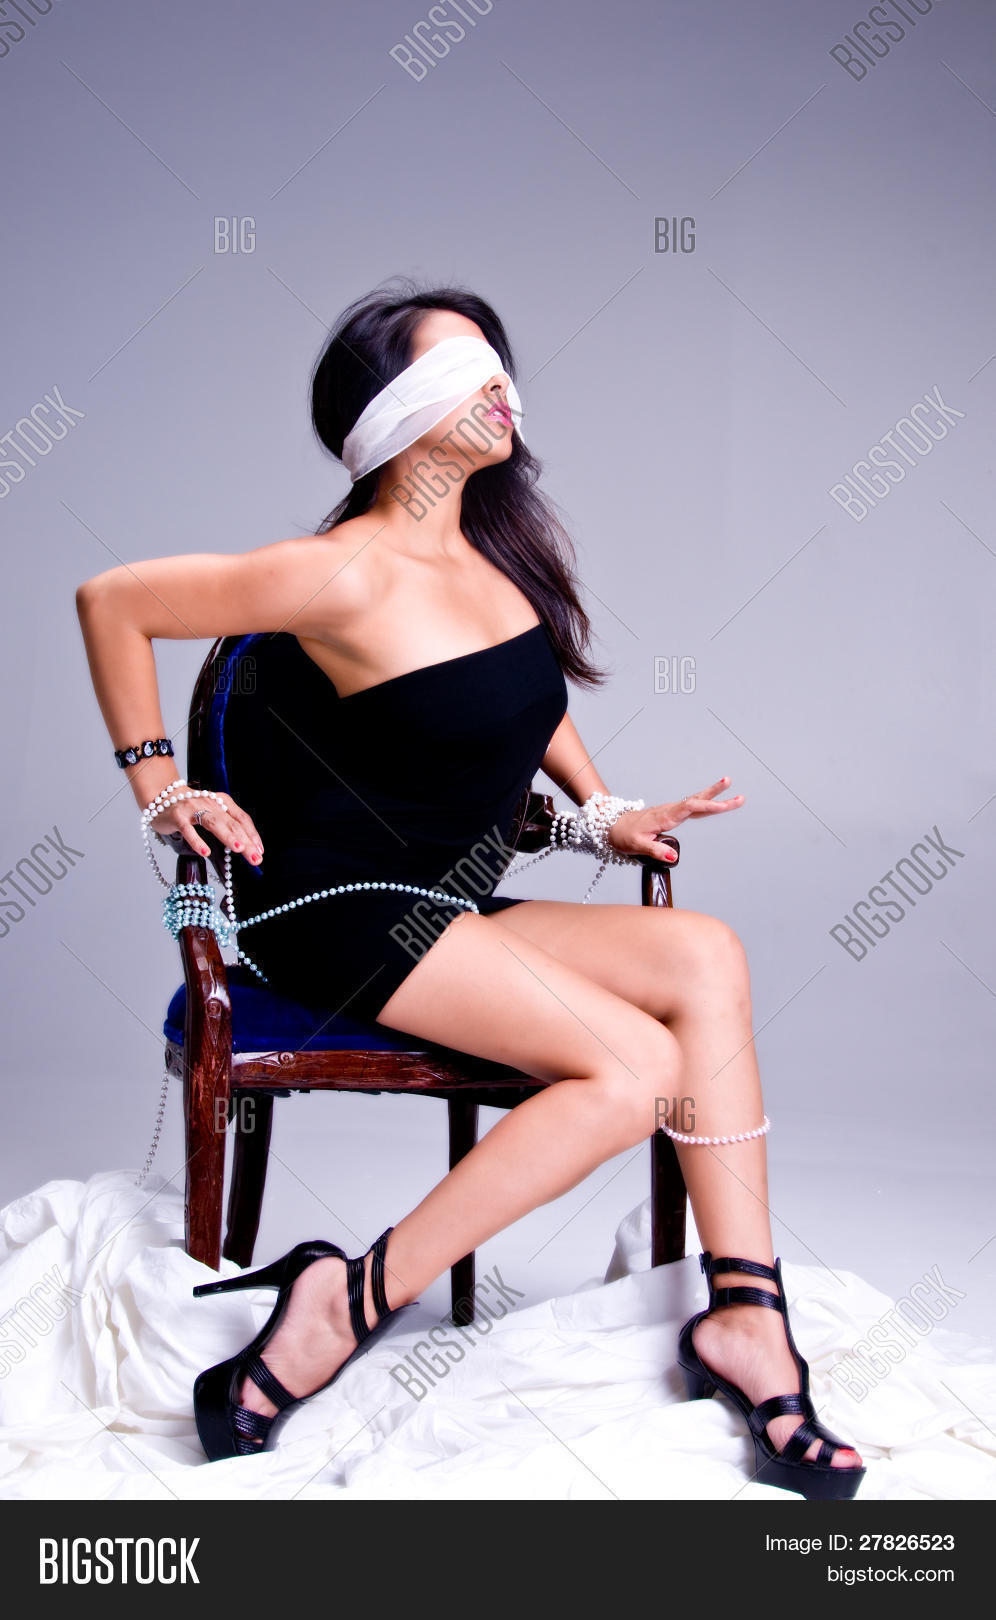 ben severson add blindfold and tied up photo